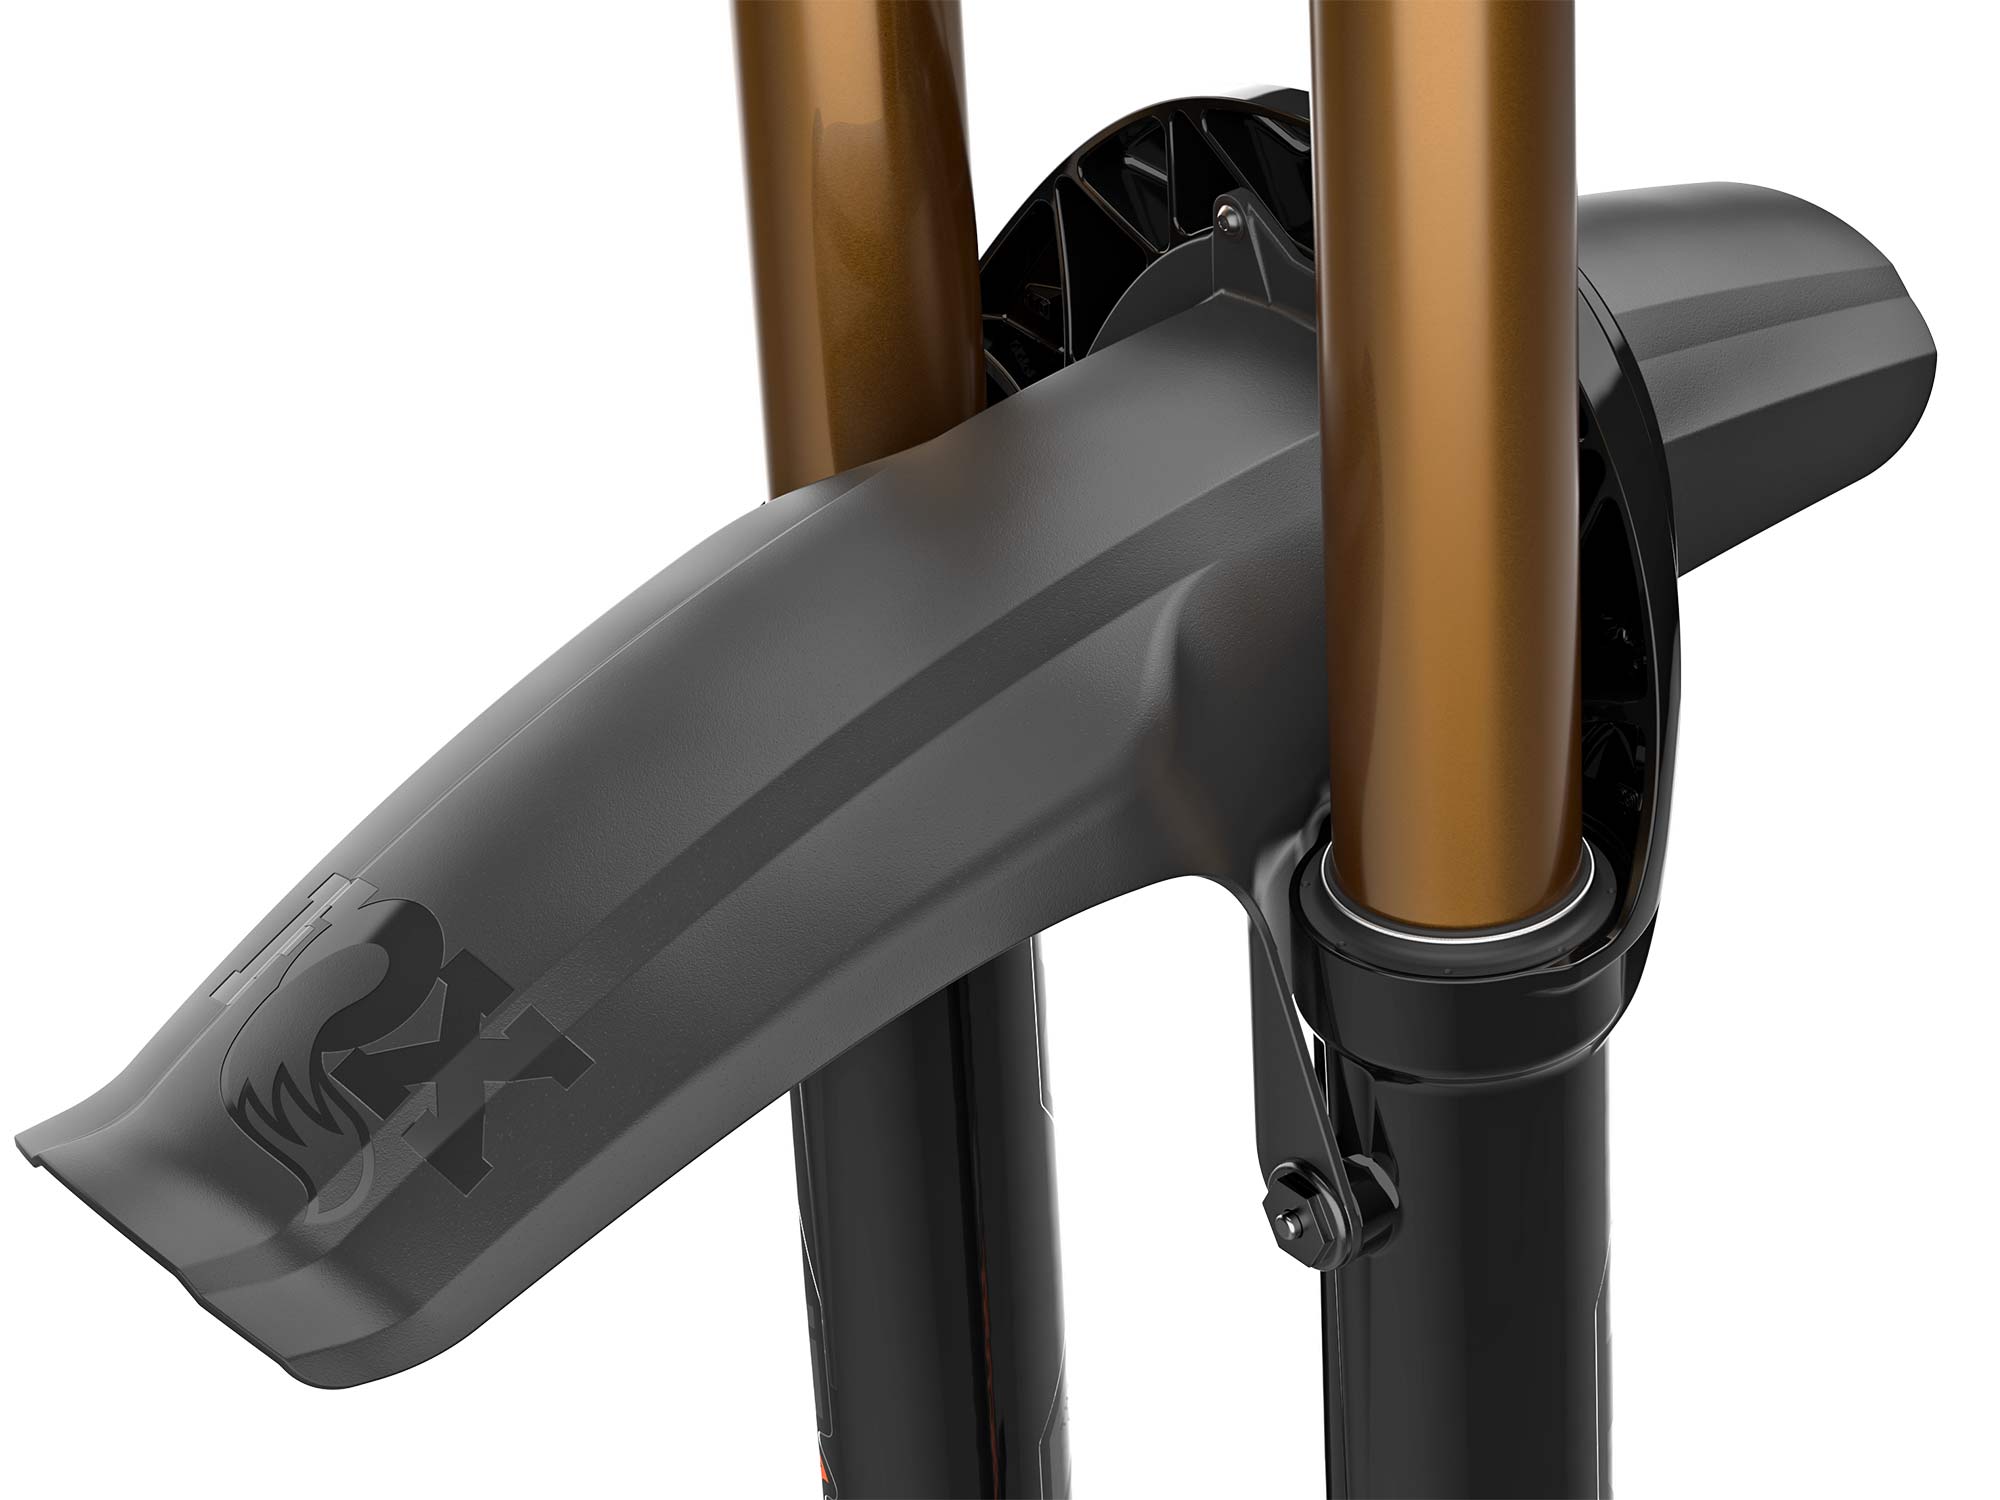 FOX XL Mudguard extends protection for 36 38 MTB forks, angled